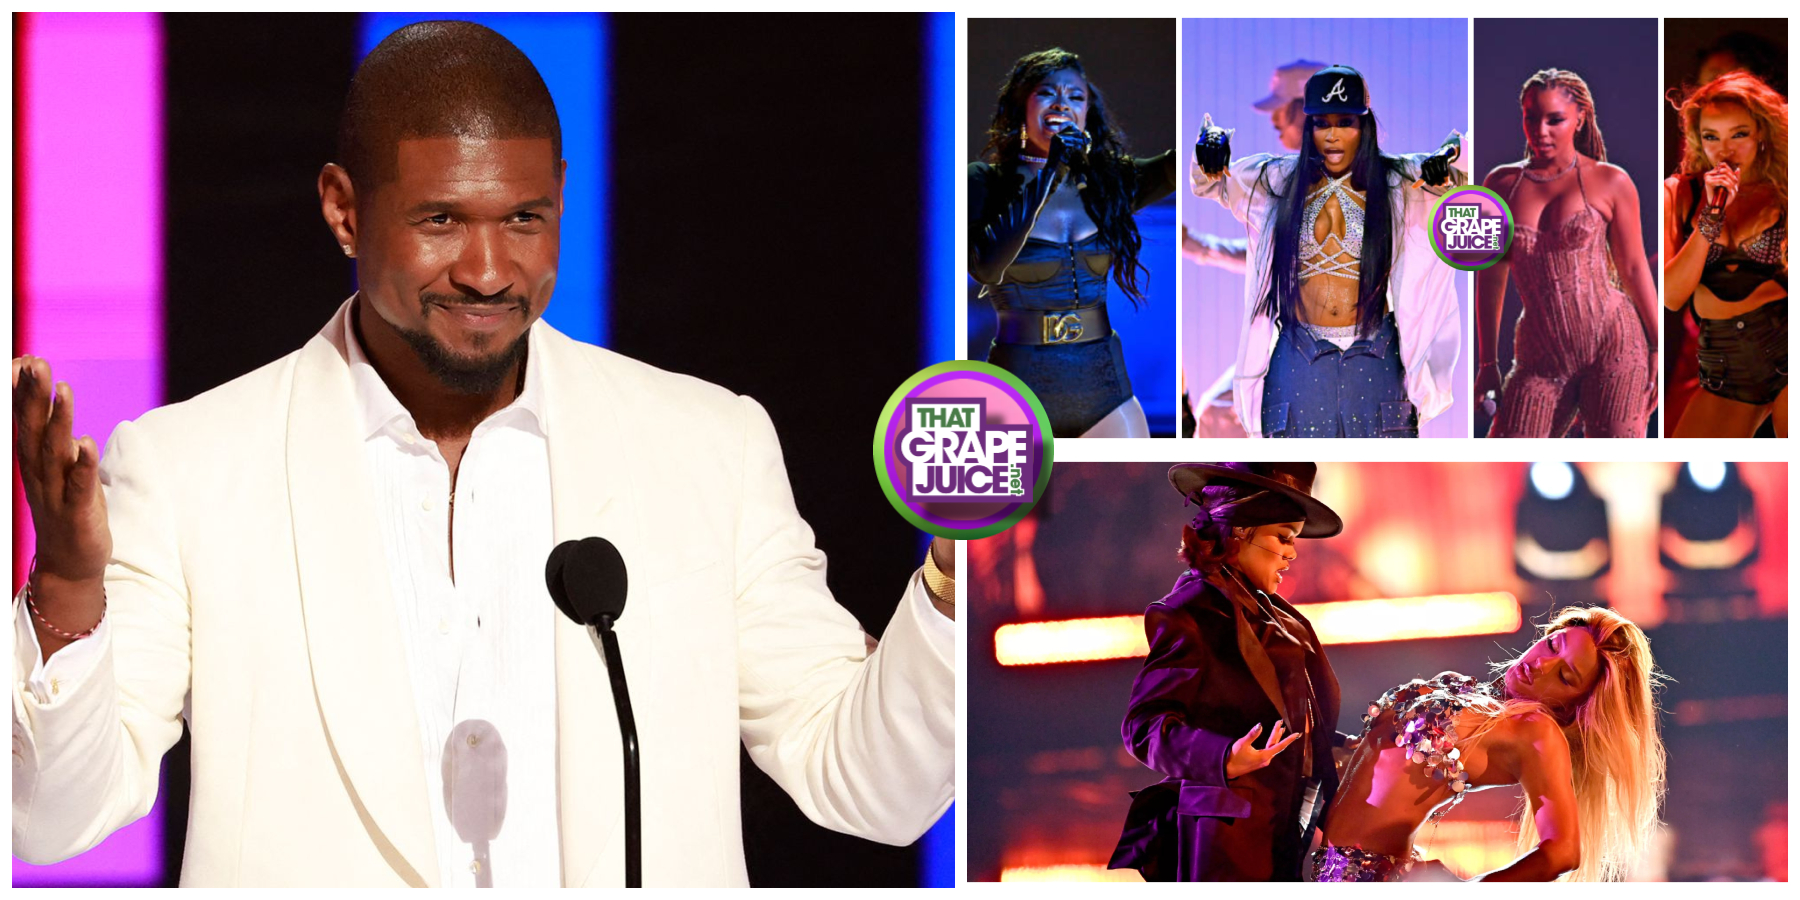 Usher Praises the BET Awards & Performers for His “Amazing” Tribute: “Y’all Did the Damn Thing!”